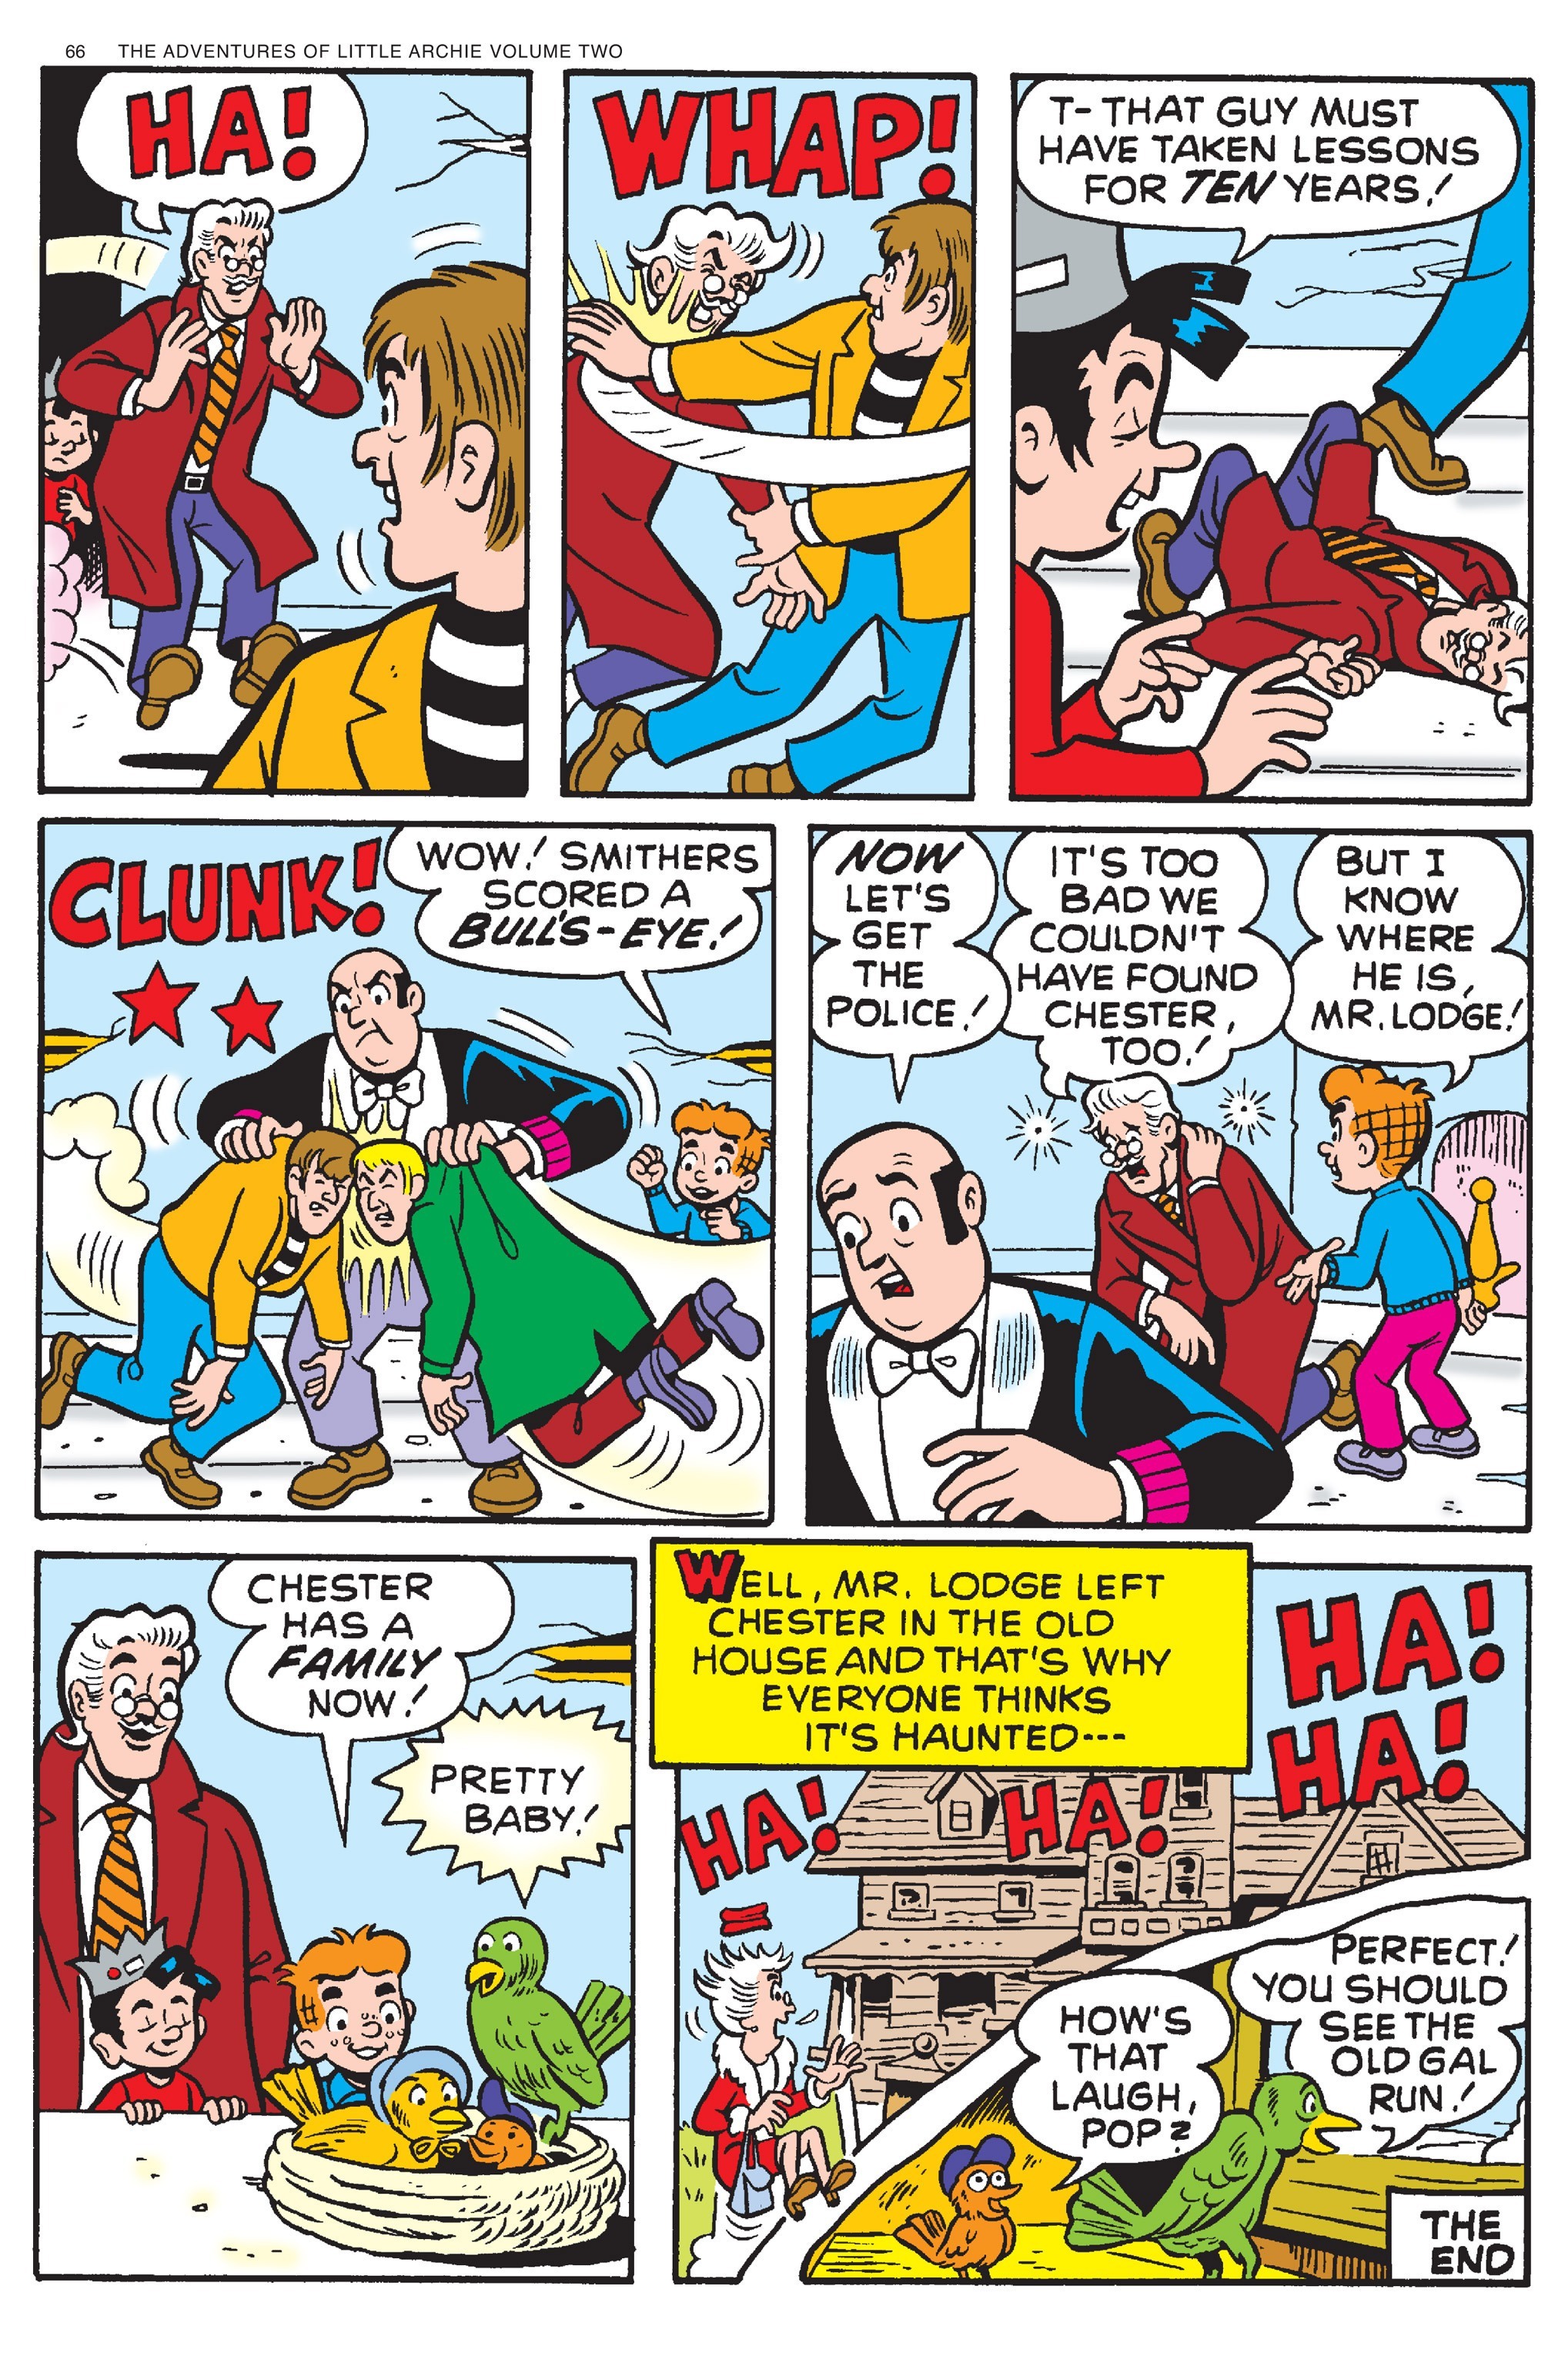 Read online Adventures of Little Archie comic -  Issue # TPB 2 - 67